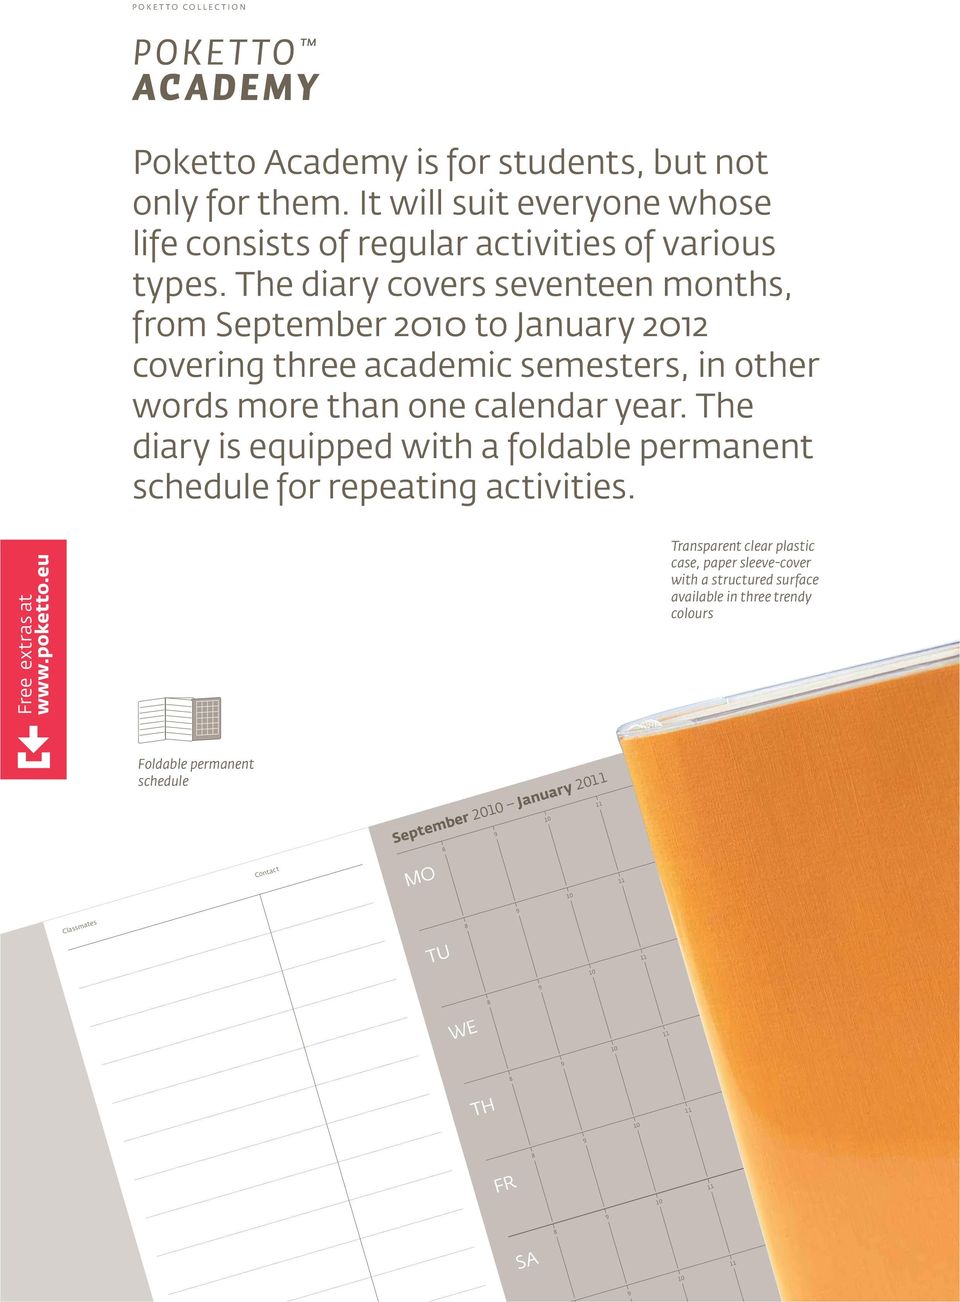 The diary is equipped with a foldable permanent schedule for repeating activities. Free extras at www.poketto.